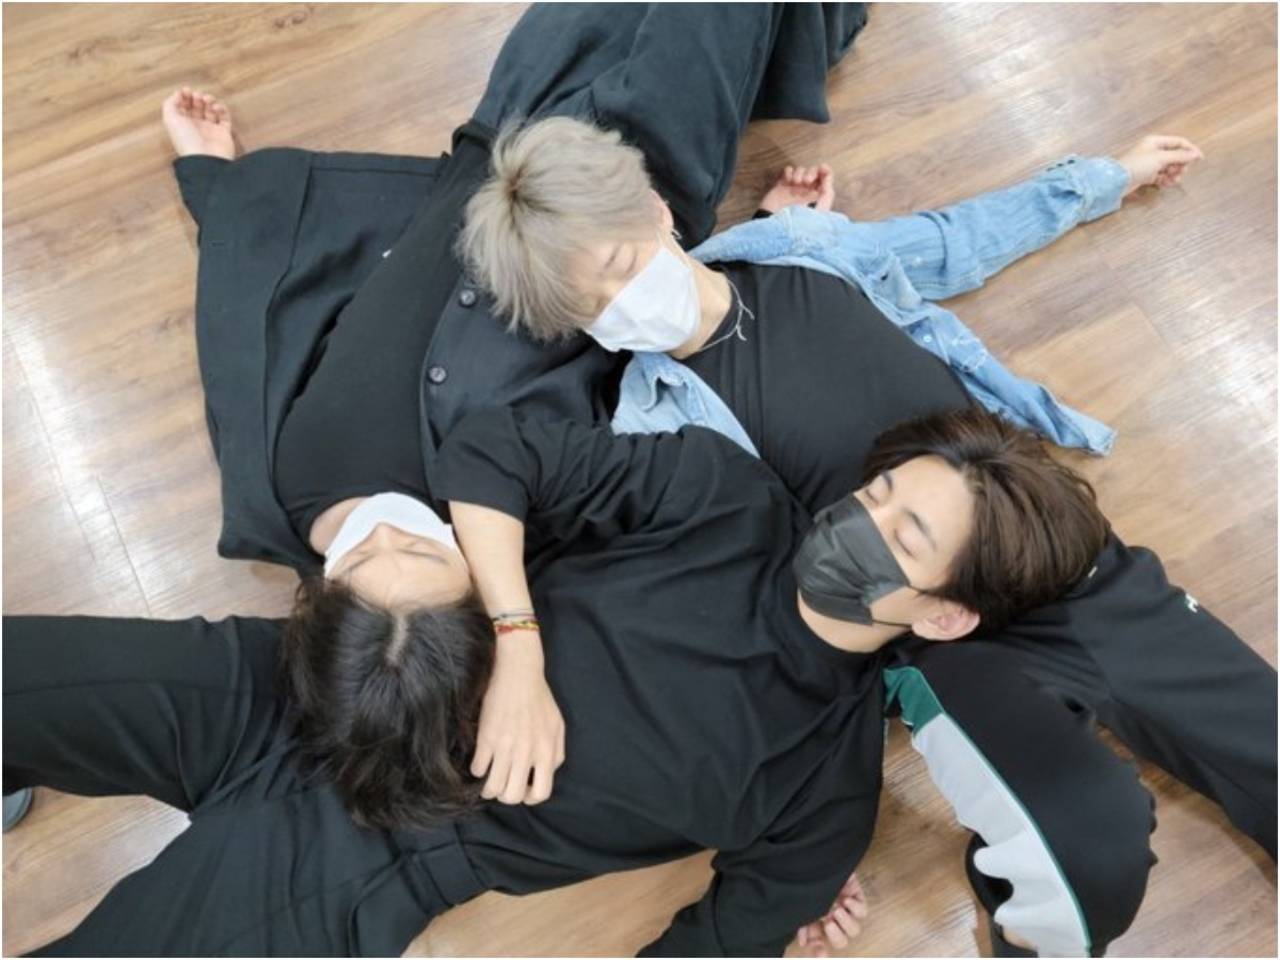 BTS members V, Jungkook and Jimin take a nap during the practice break; check out their adorable PHOTO | K-pop Movie News - Times of India